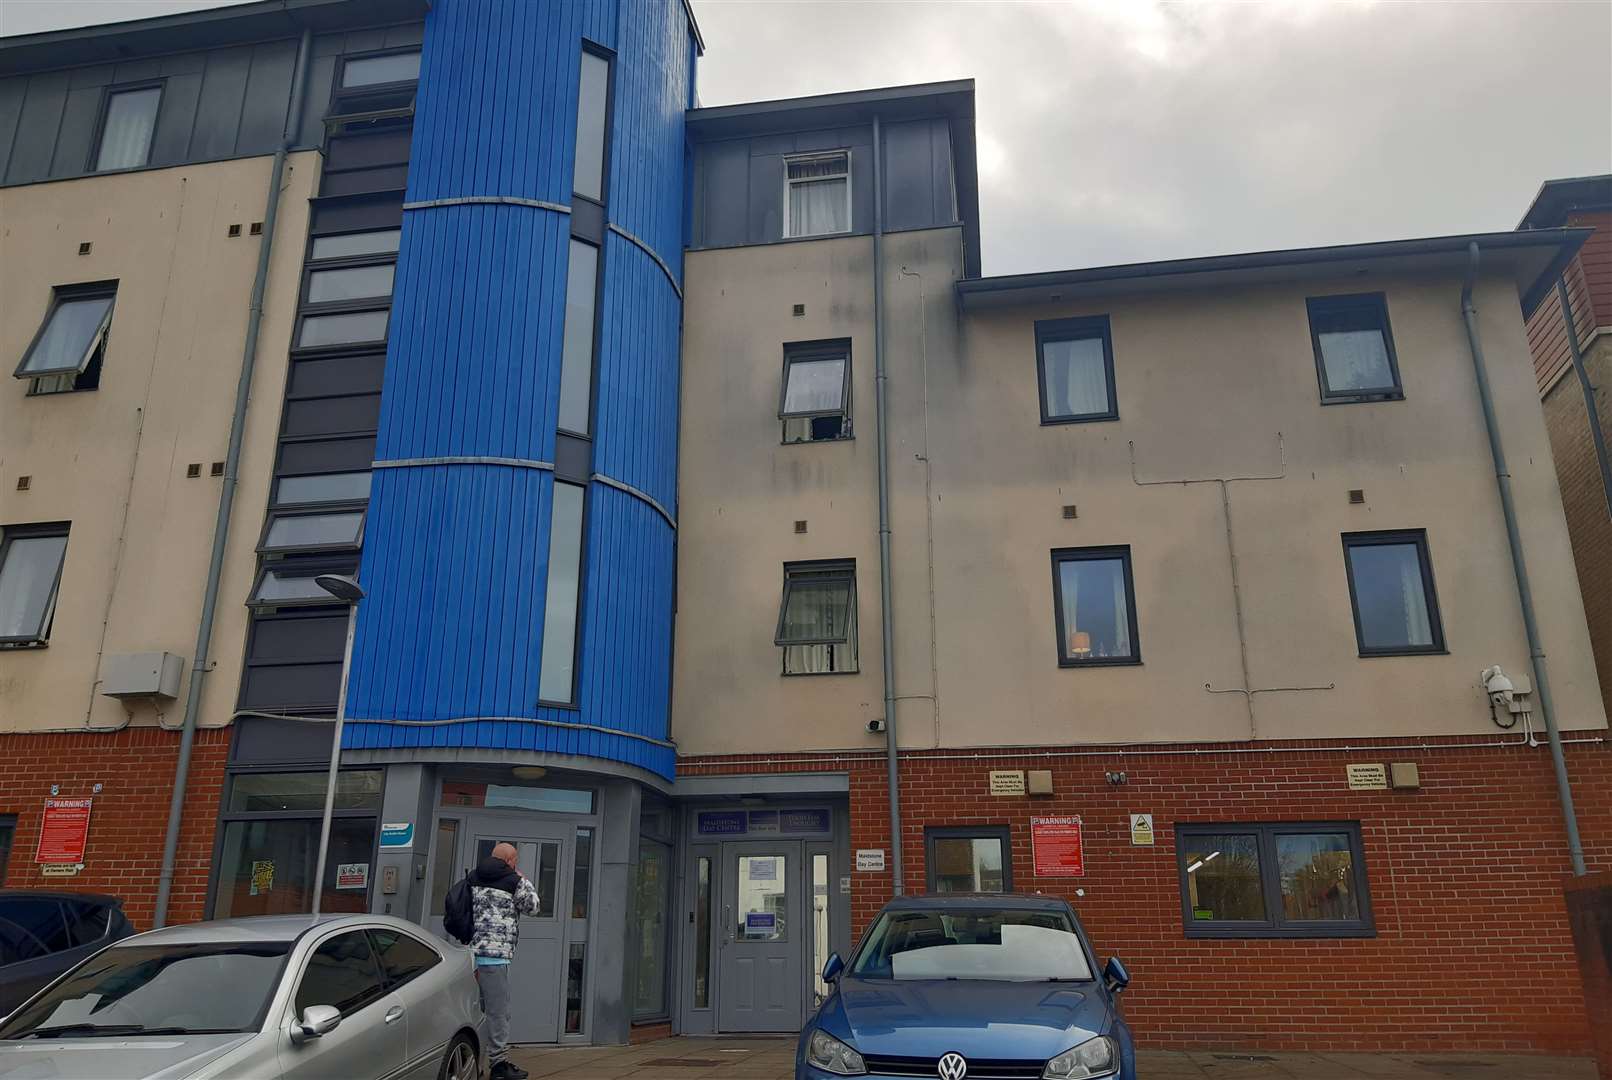 Maidstone Homeless Care has a day centre in Knightrider Street